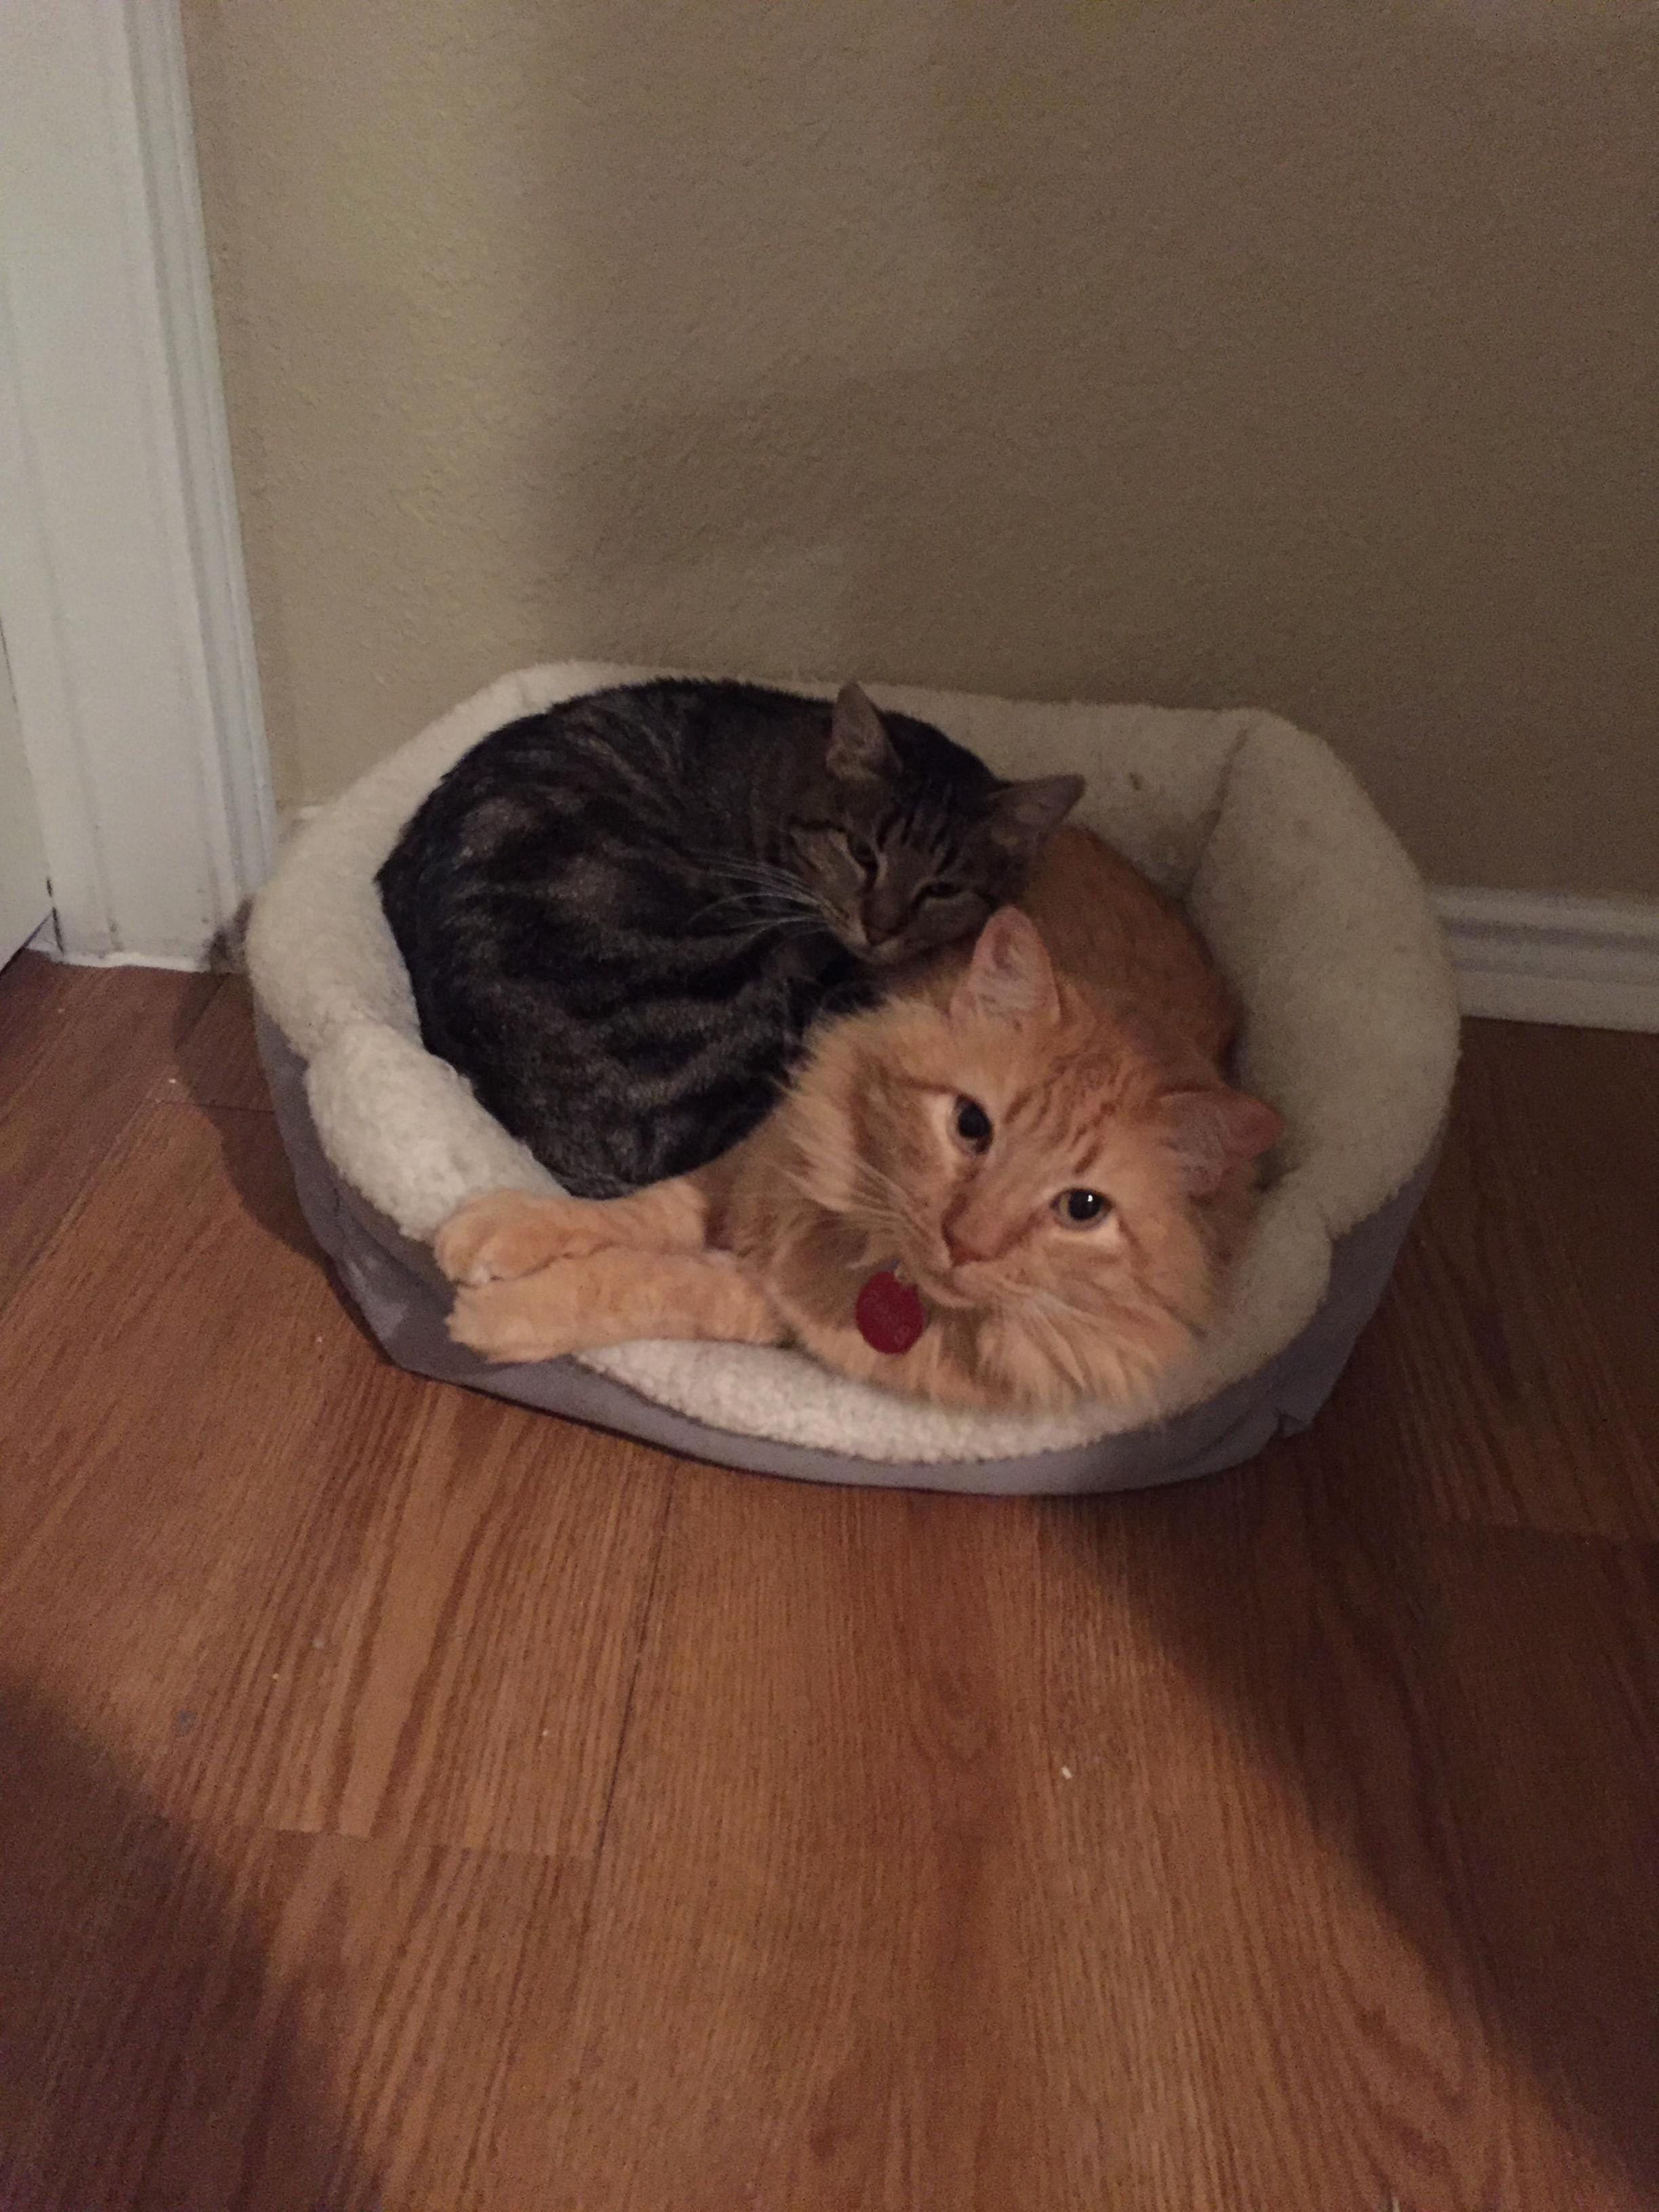 They hated each other at first… now, theyre pretty much inseparable